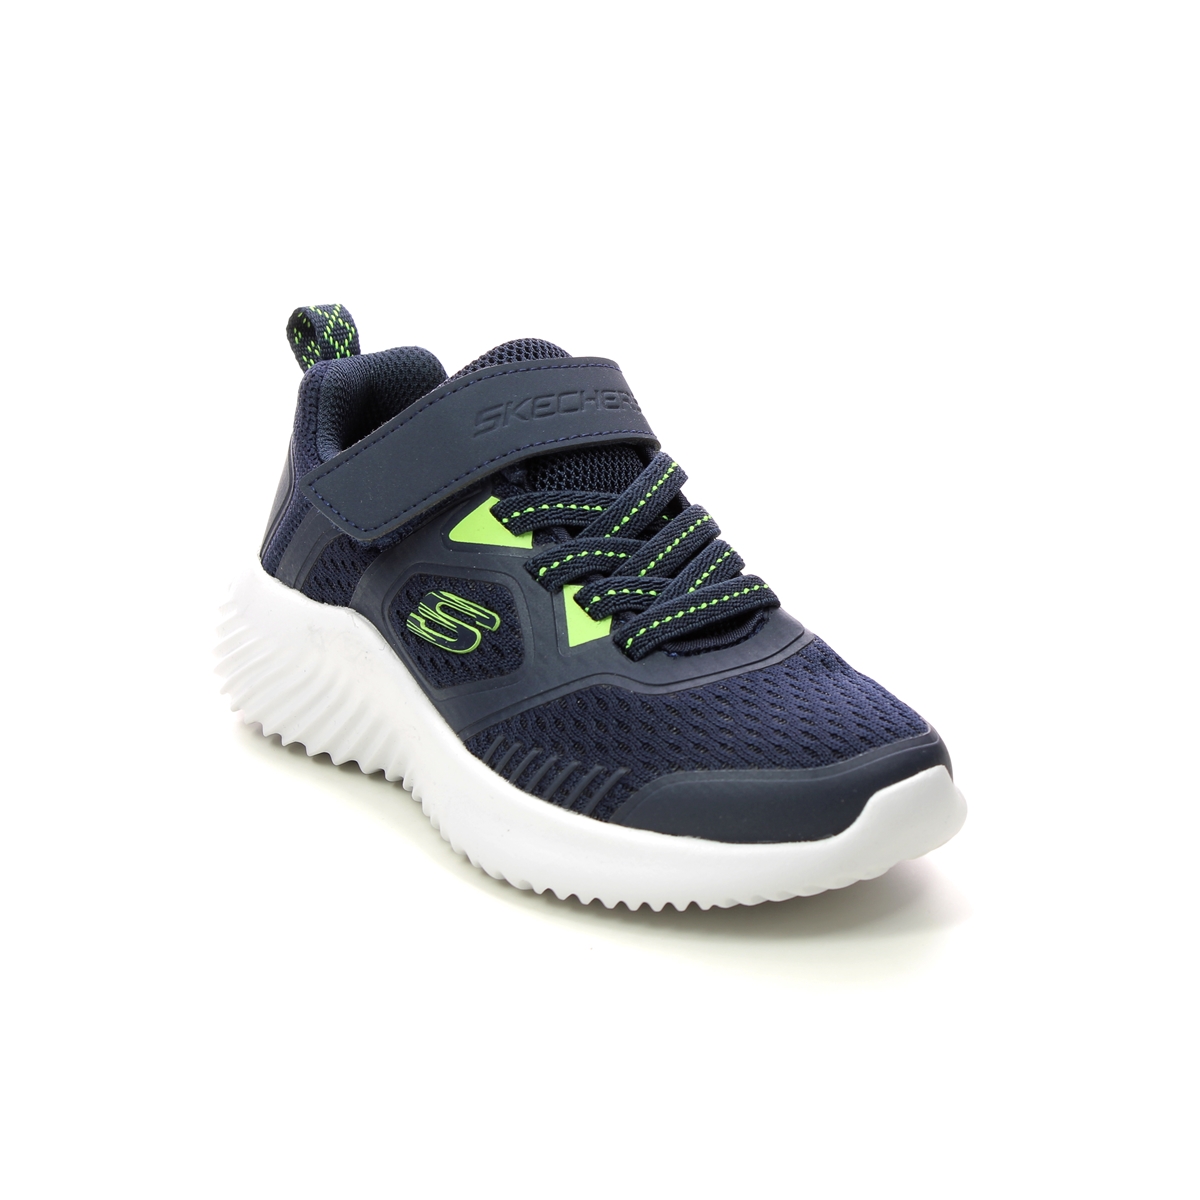 Skechers Bounder Navy Lime Kids Trainers 403736L In Size 32 In Plain Navy Lime For kids